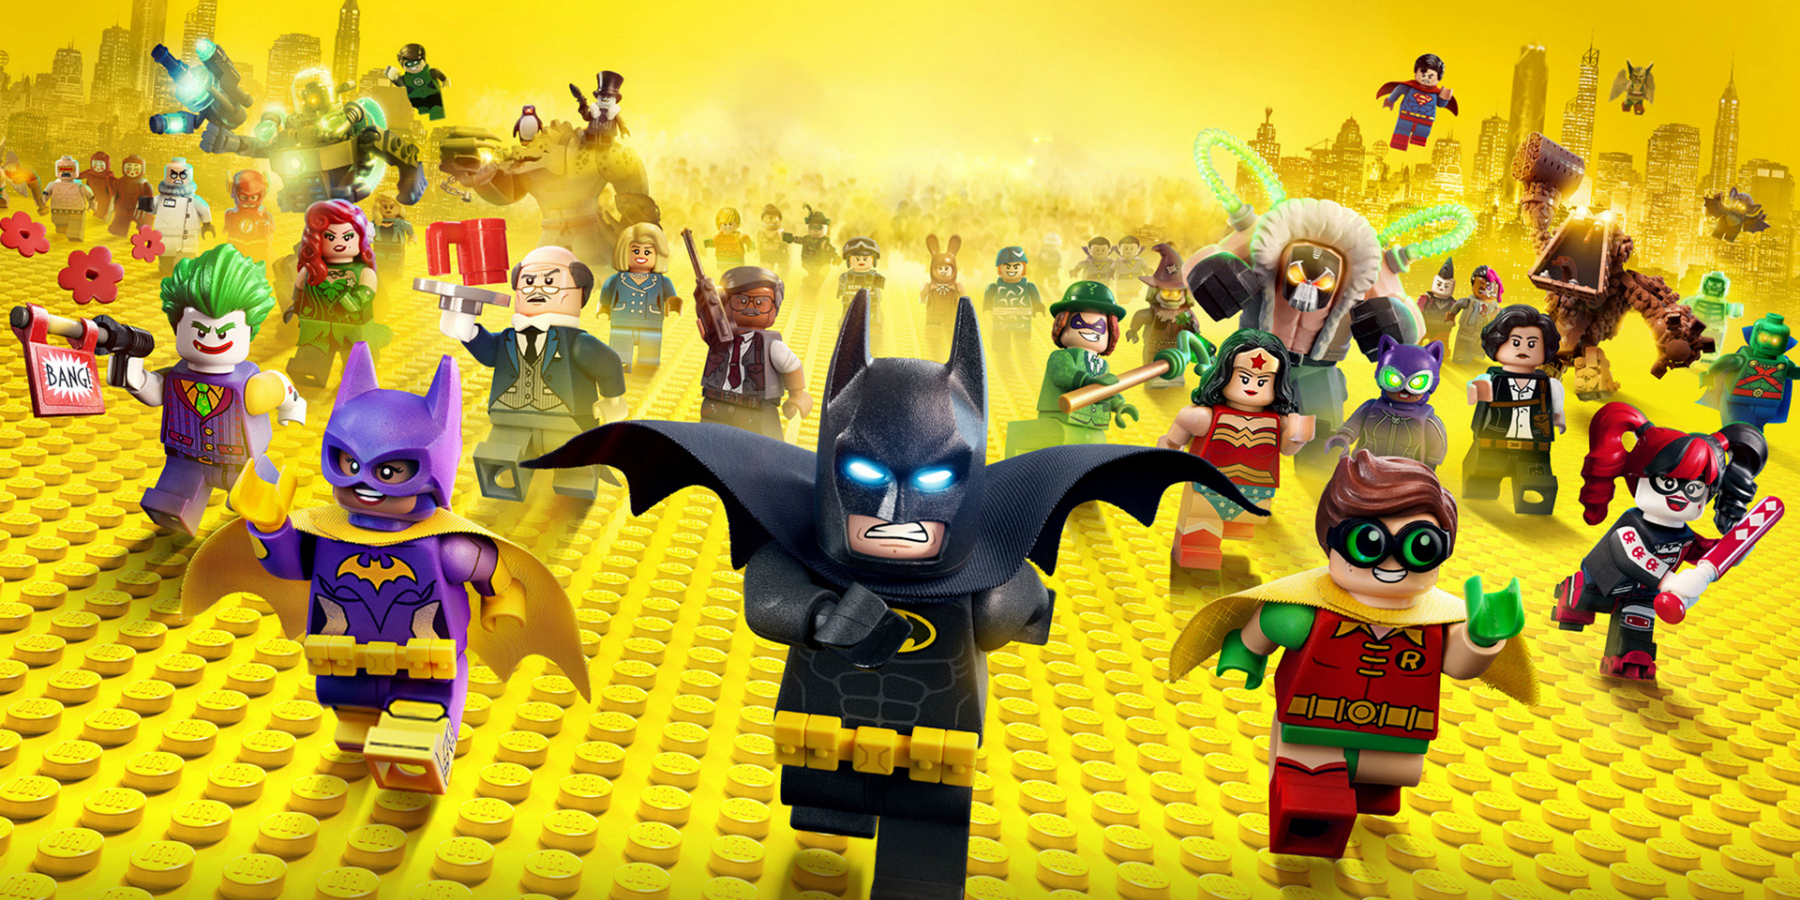 The Lego Batman Movie  Dr. Grob's Animation Review